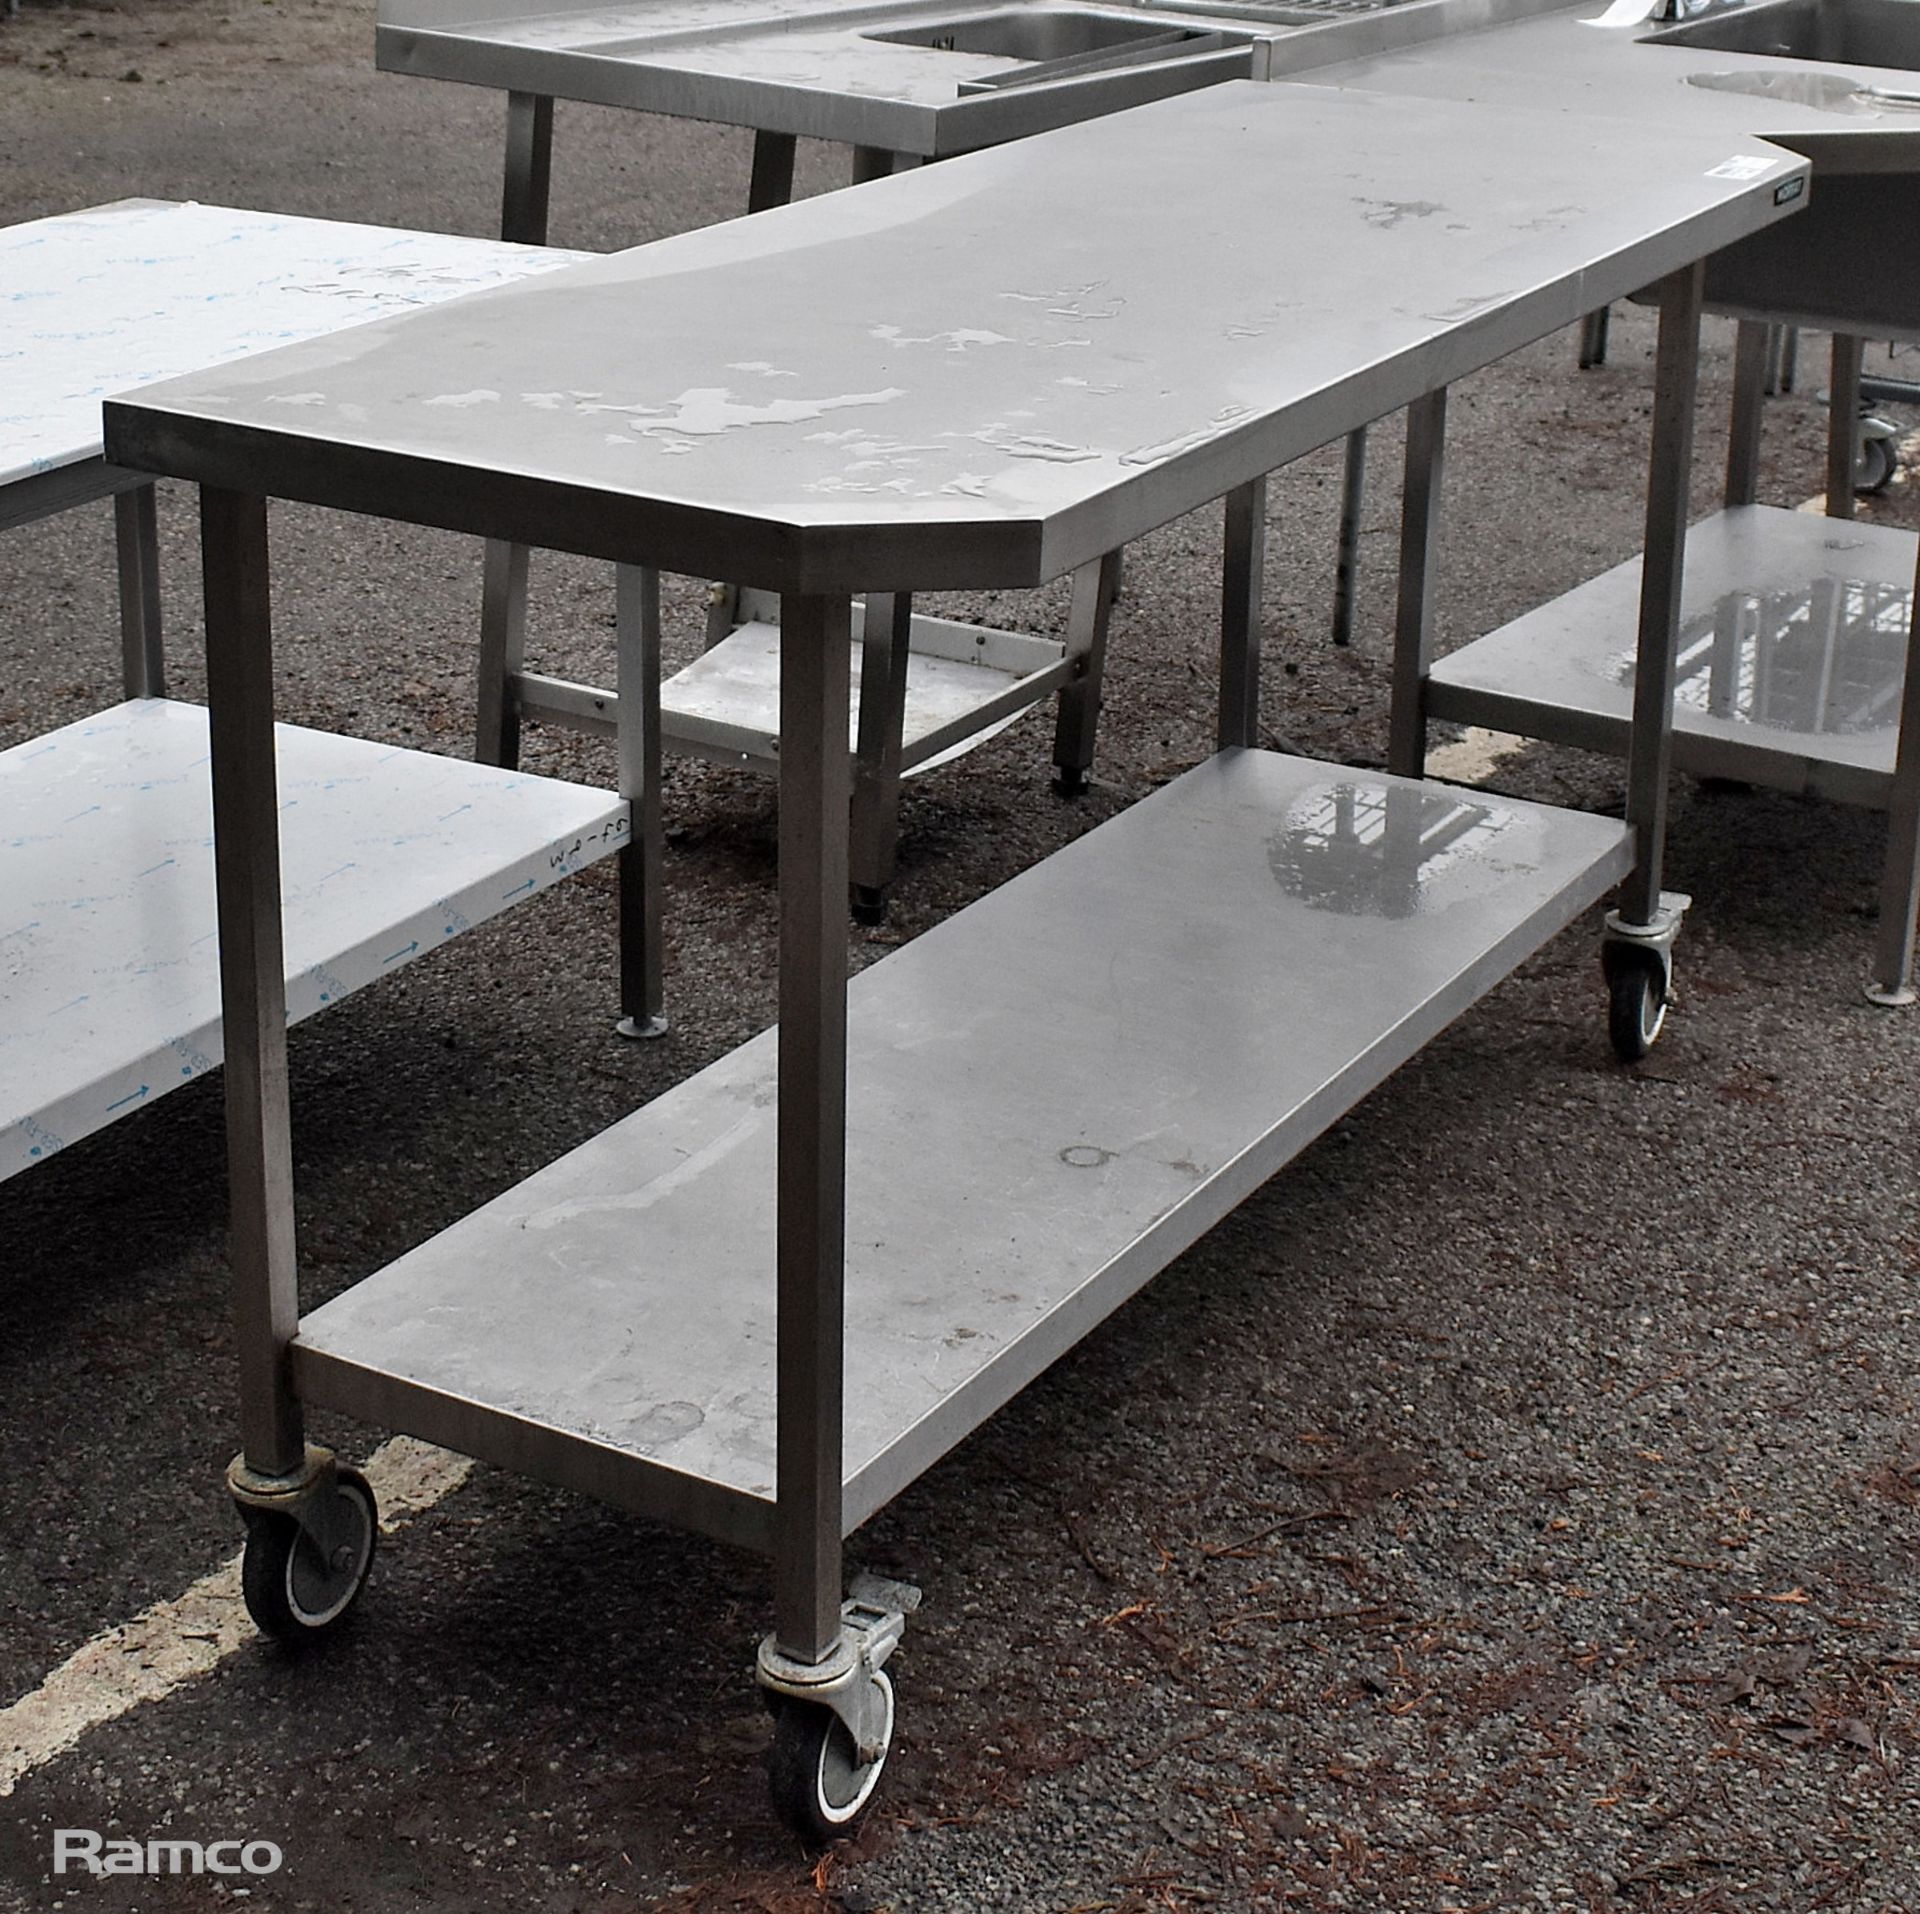 Moffat stainless steel portable trolley - 60x160x90cm - Image 2 of 3